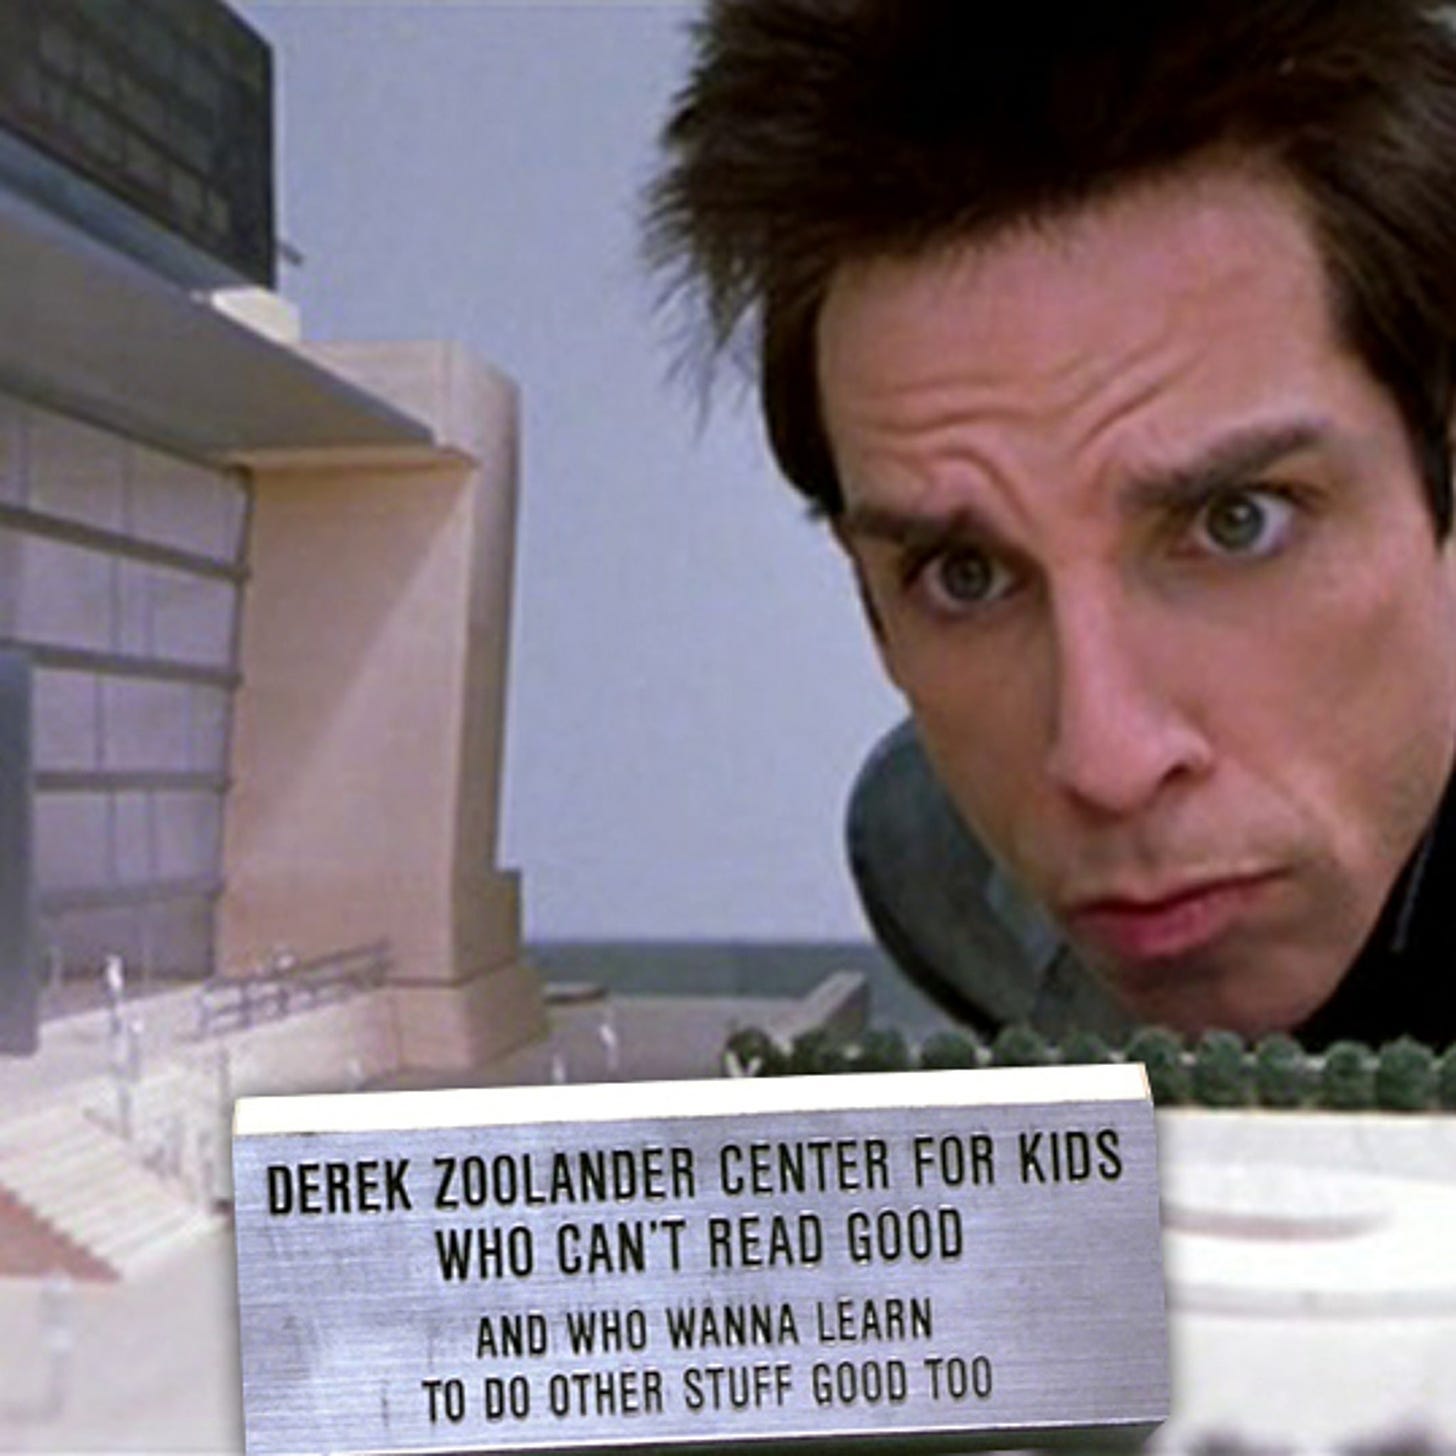 Zoolander 2' ... 'Center For Kids Who Can't Read Good' Becomes The Real Deal